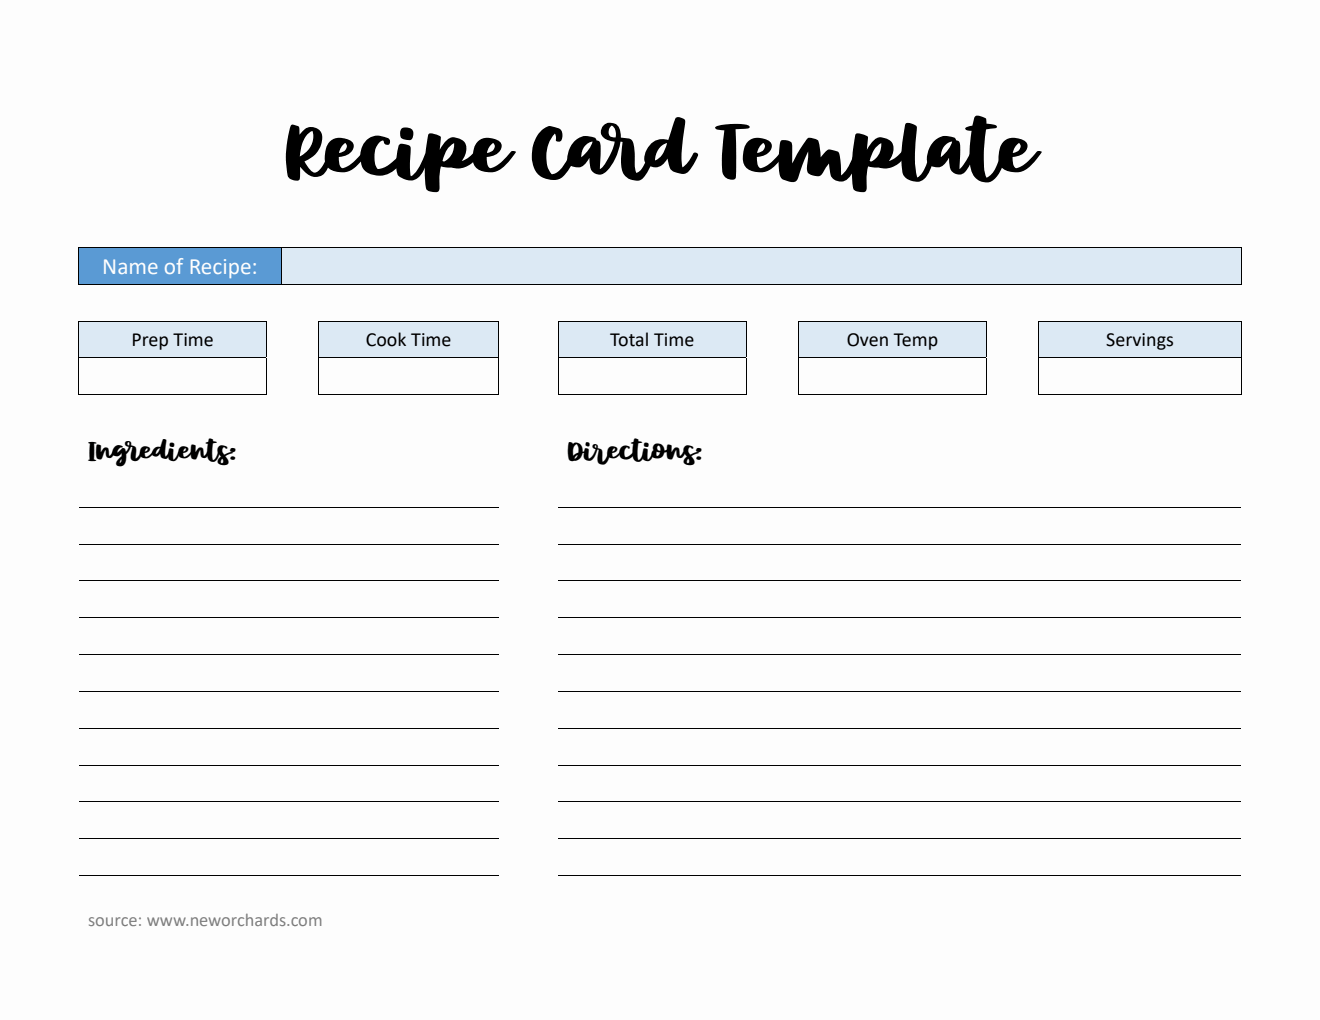 Free Recipe Card Template in Word Format